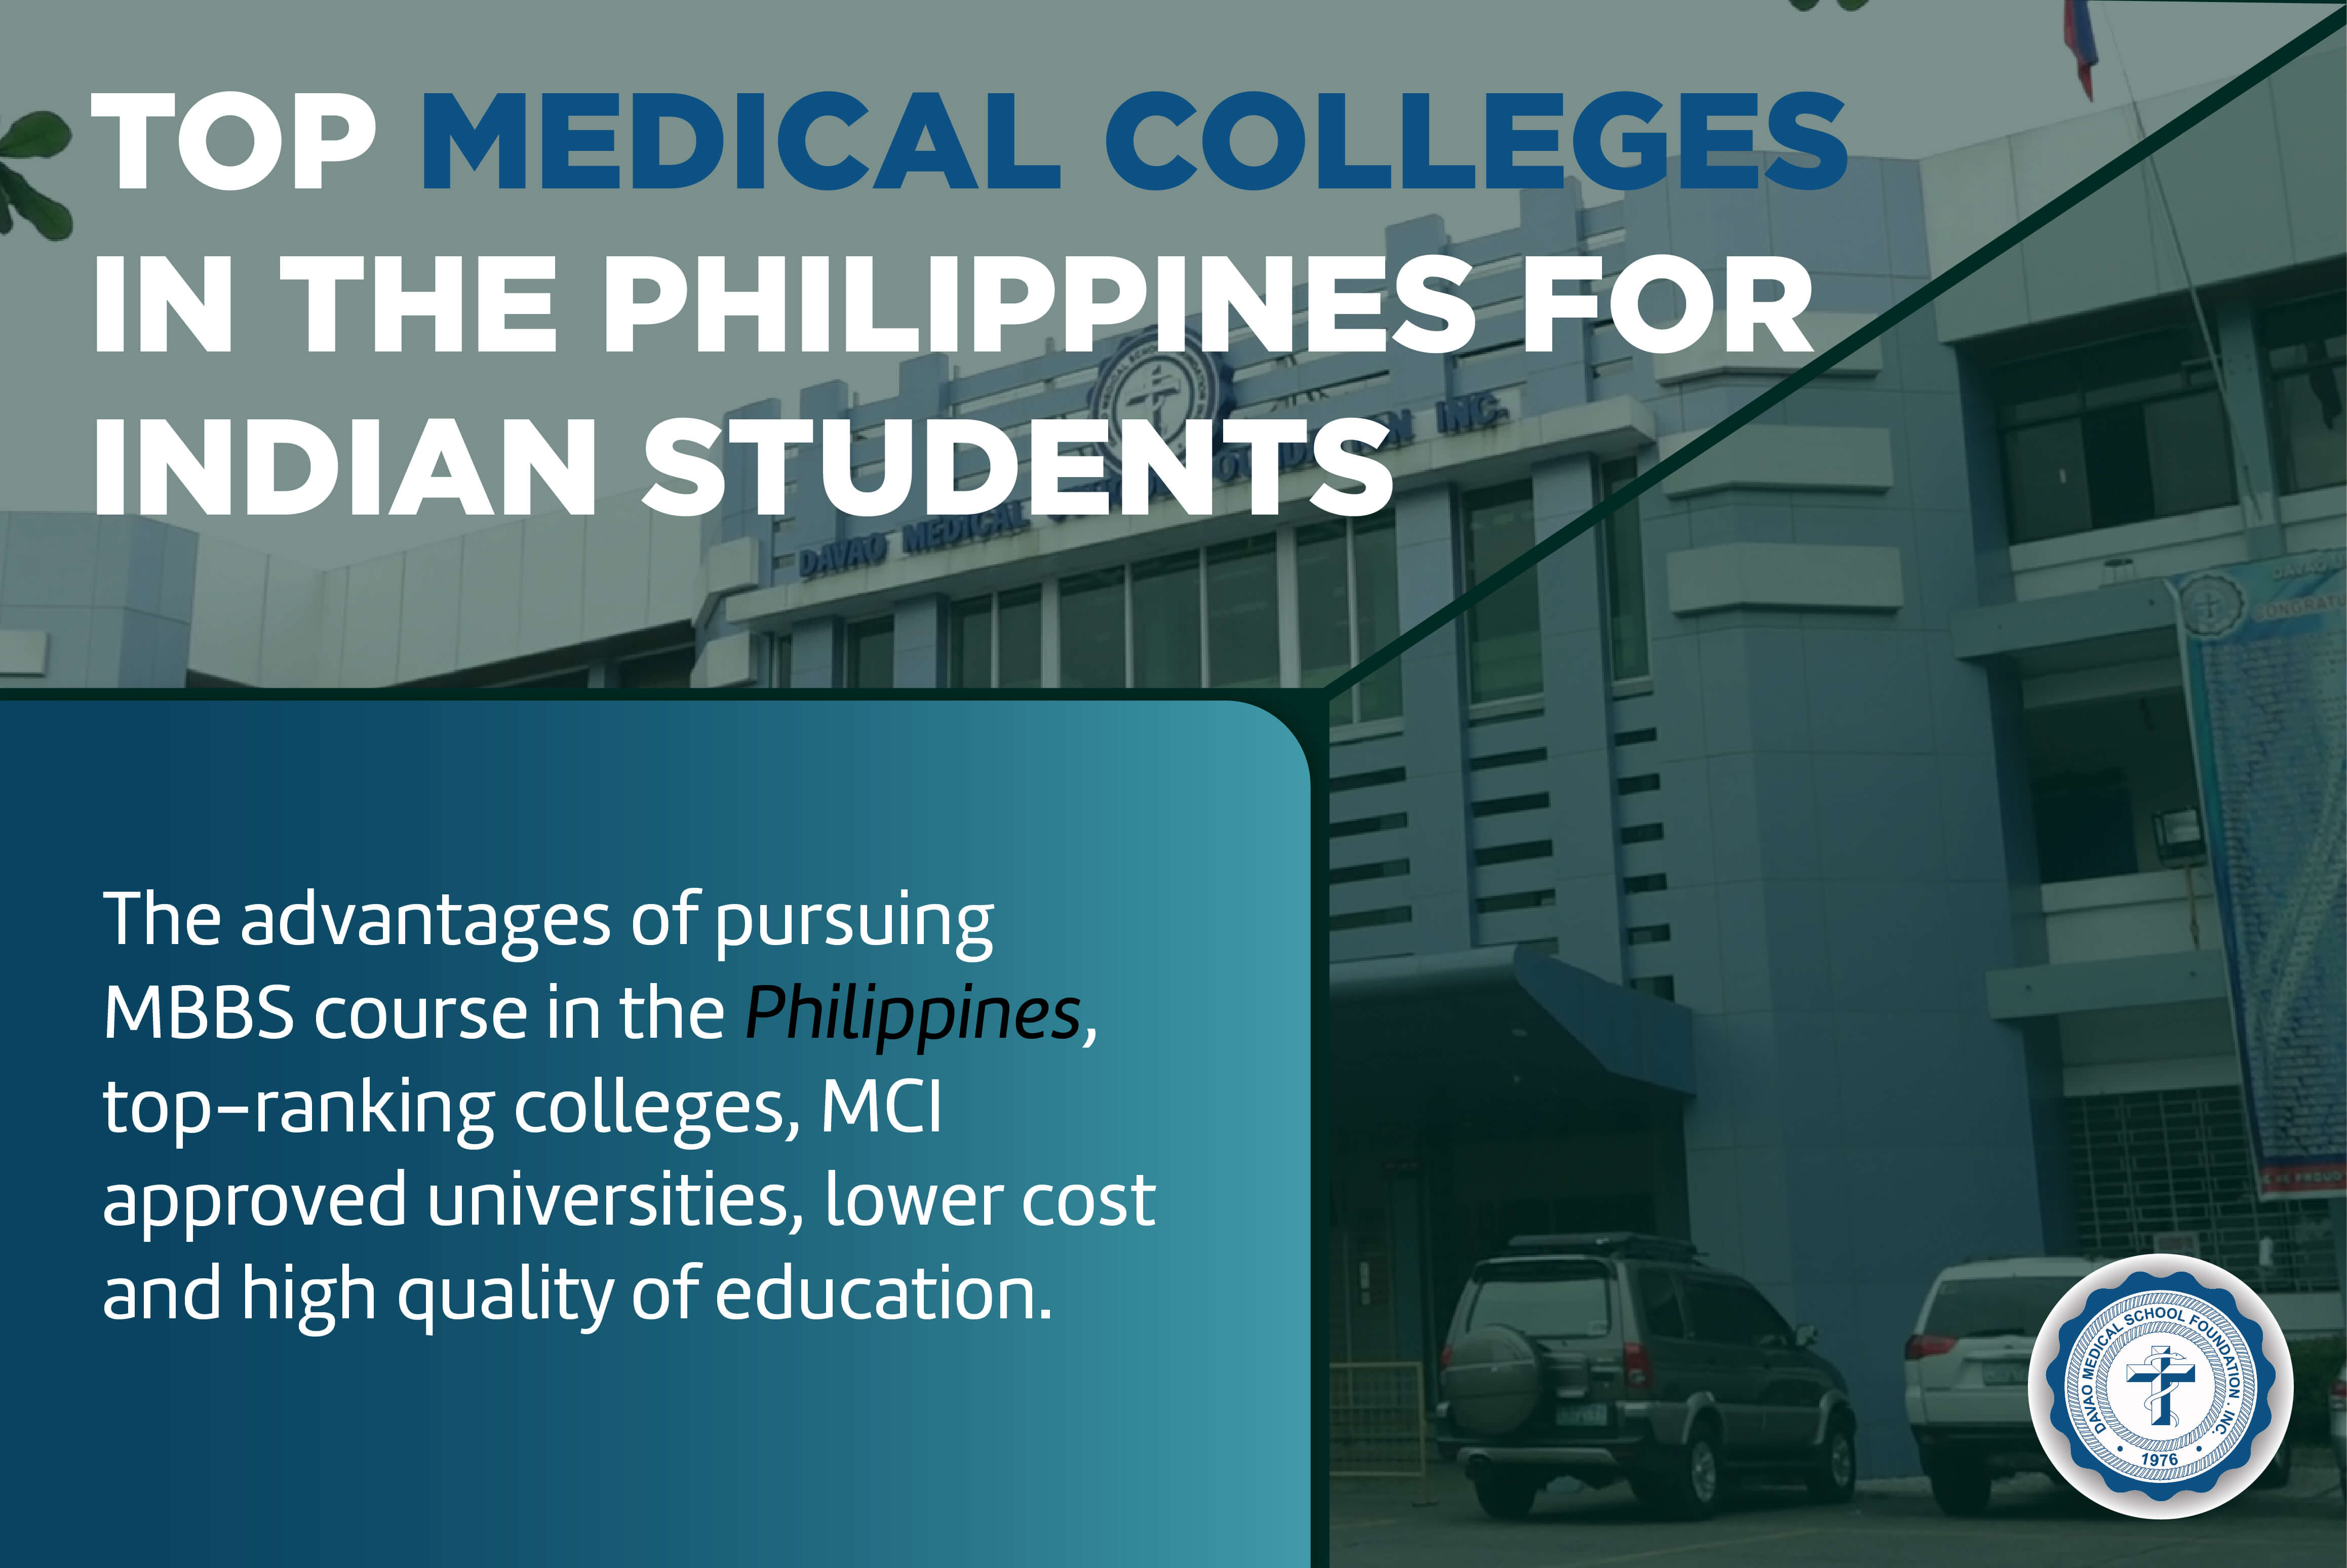 Top medical colleges in the Philippines for Indian students